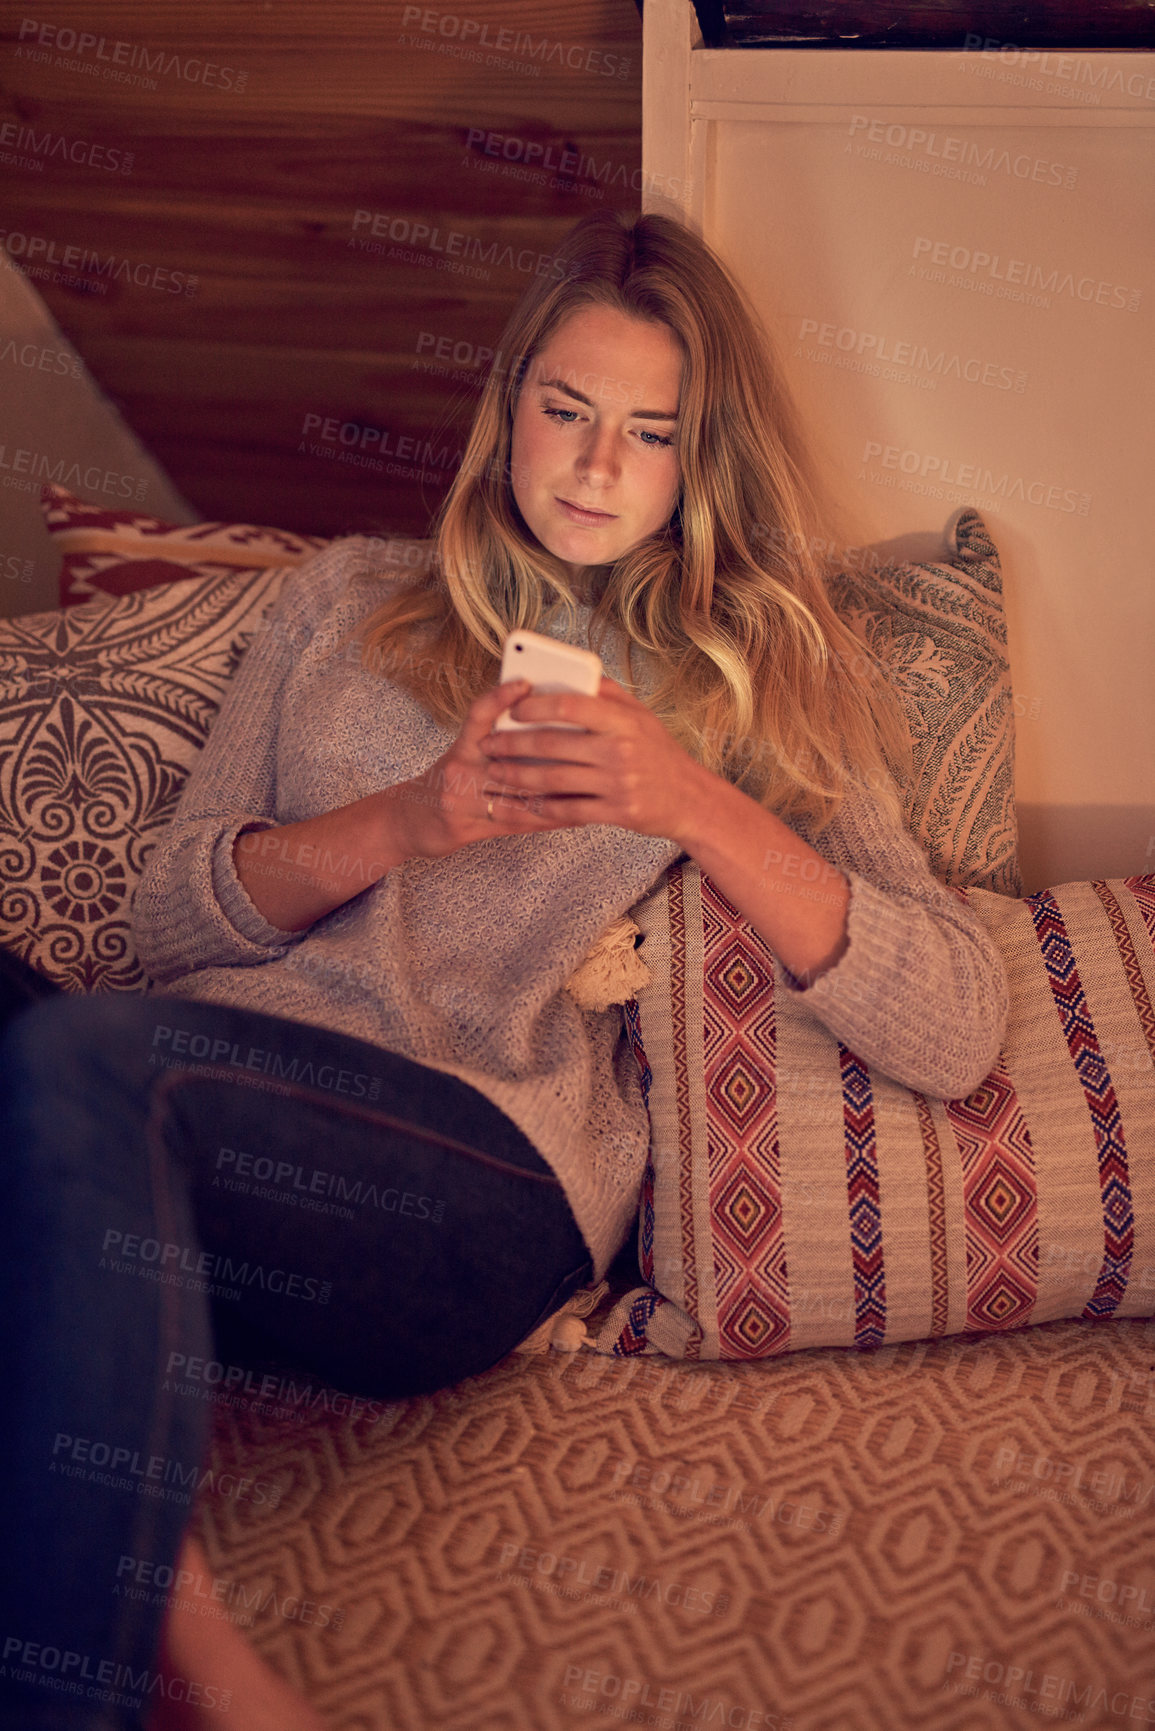 Buy stock photo Shot of a young woman texting on her smartphone while relaxing in her bedroom at home